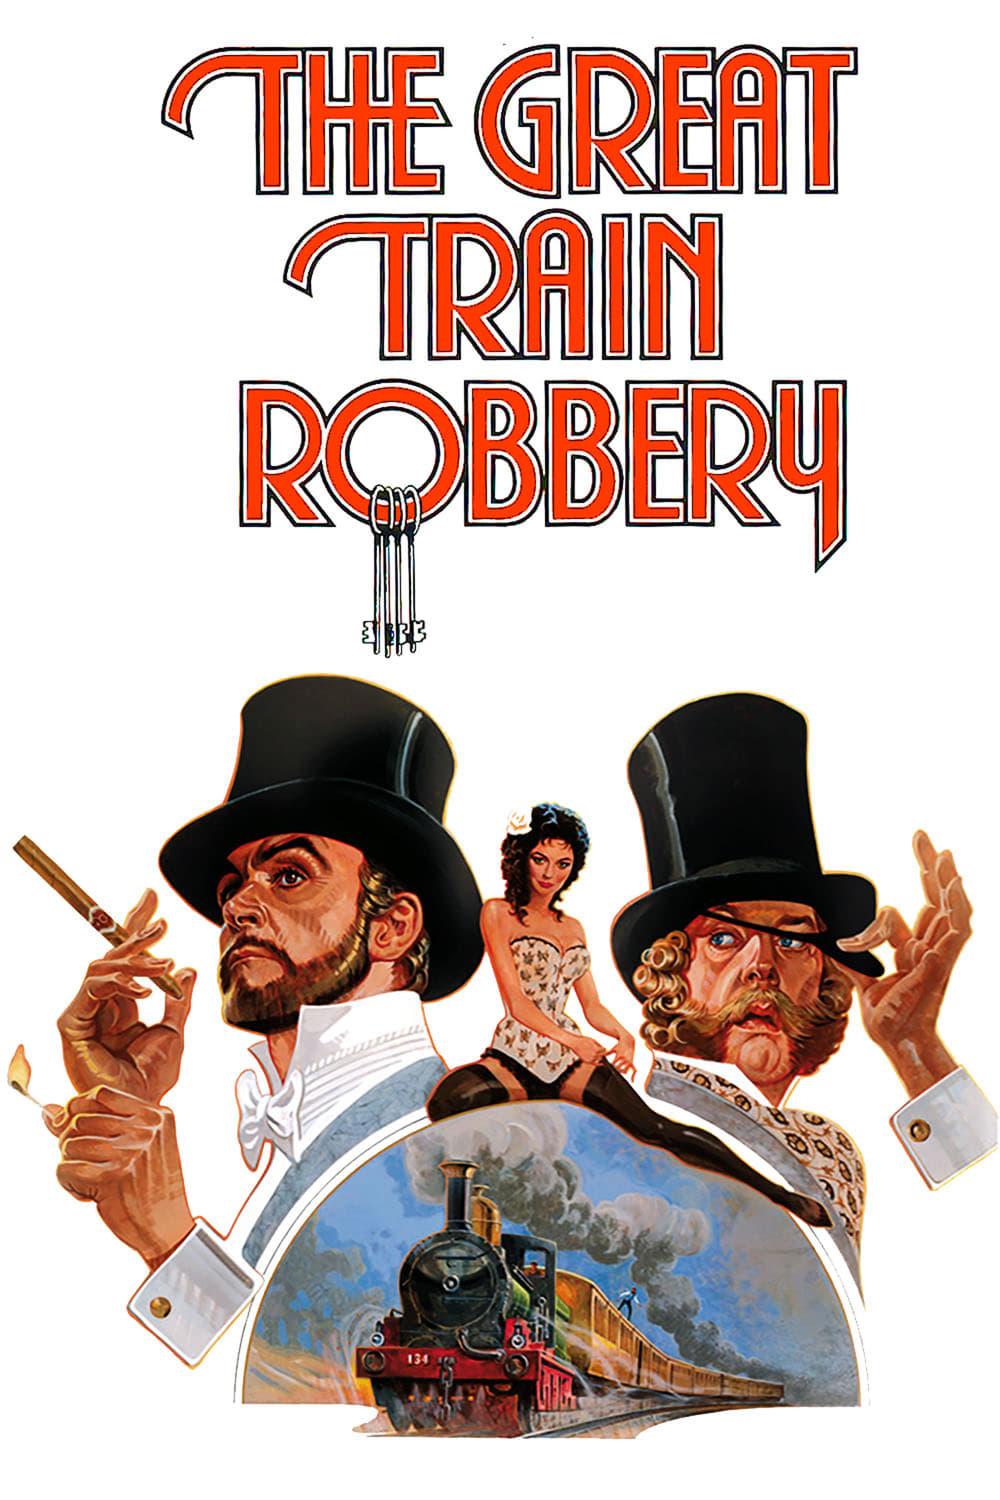 The First Great Train Robbery poster